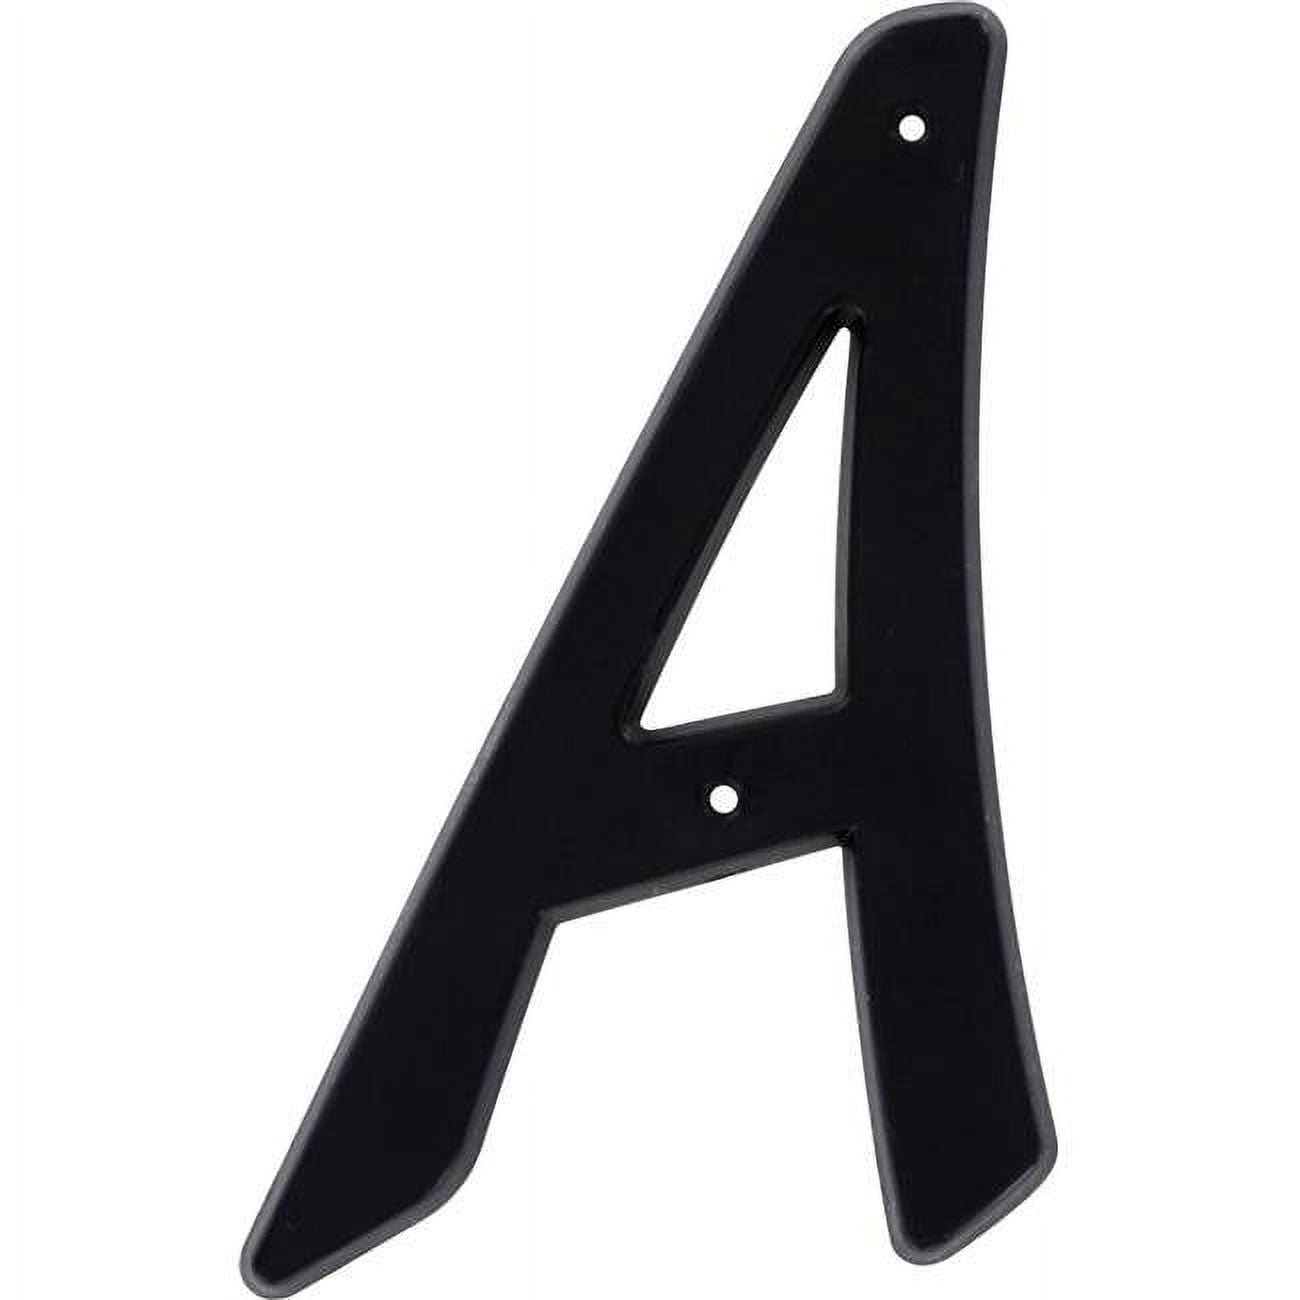 Vinyl Letters Removable Adh 4 Ff 2pc Black, 1 - Fry's Food Stores